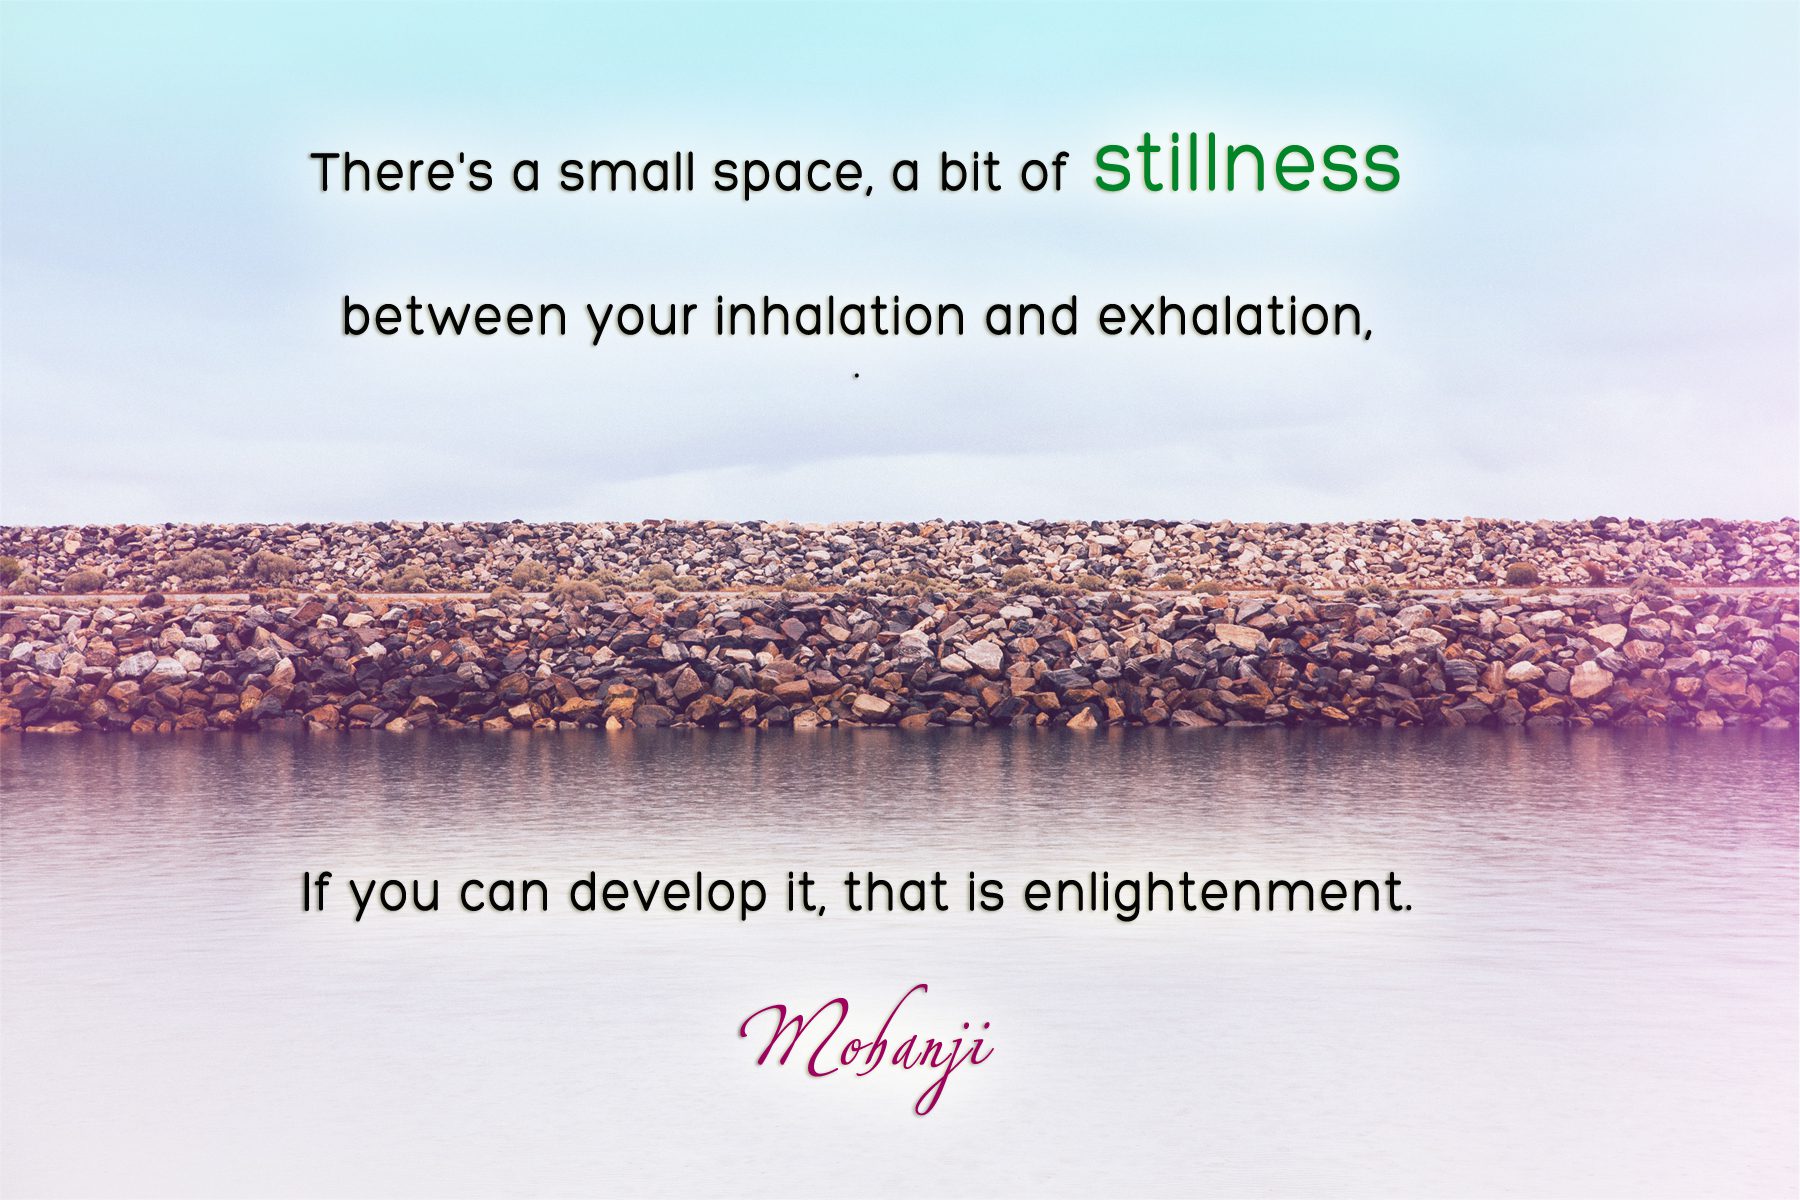 Mohanji quote - There is a small space, a bit of stillness